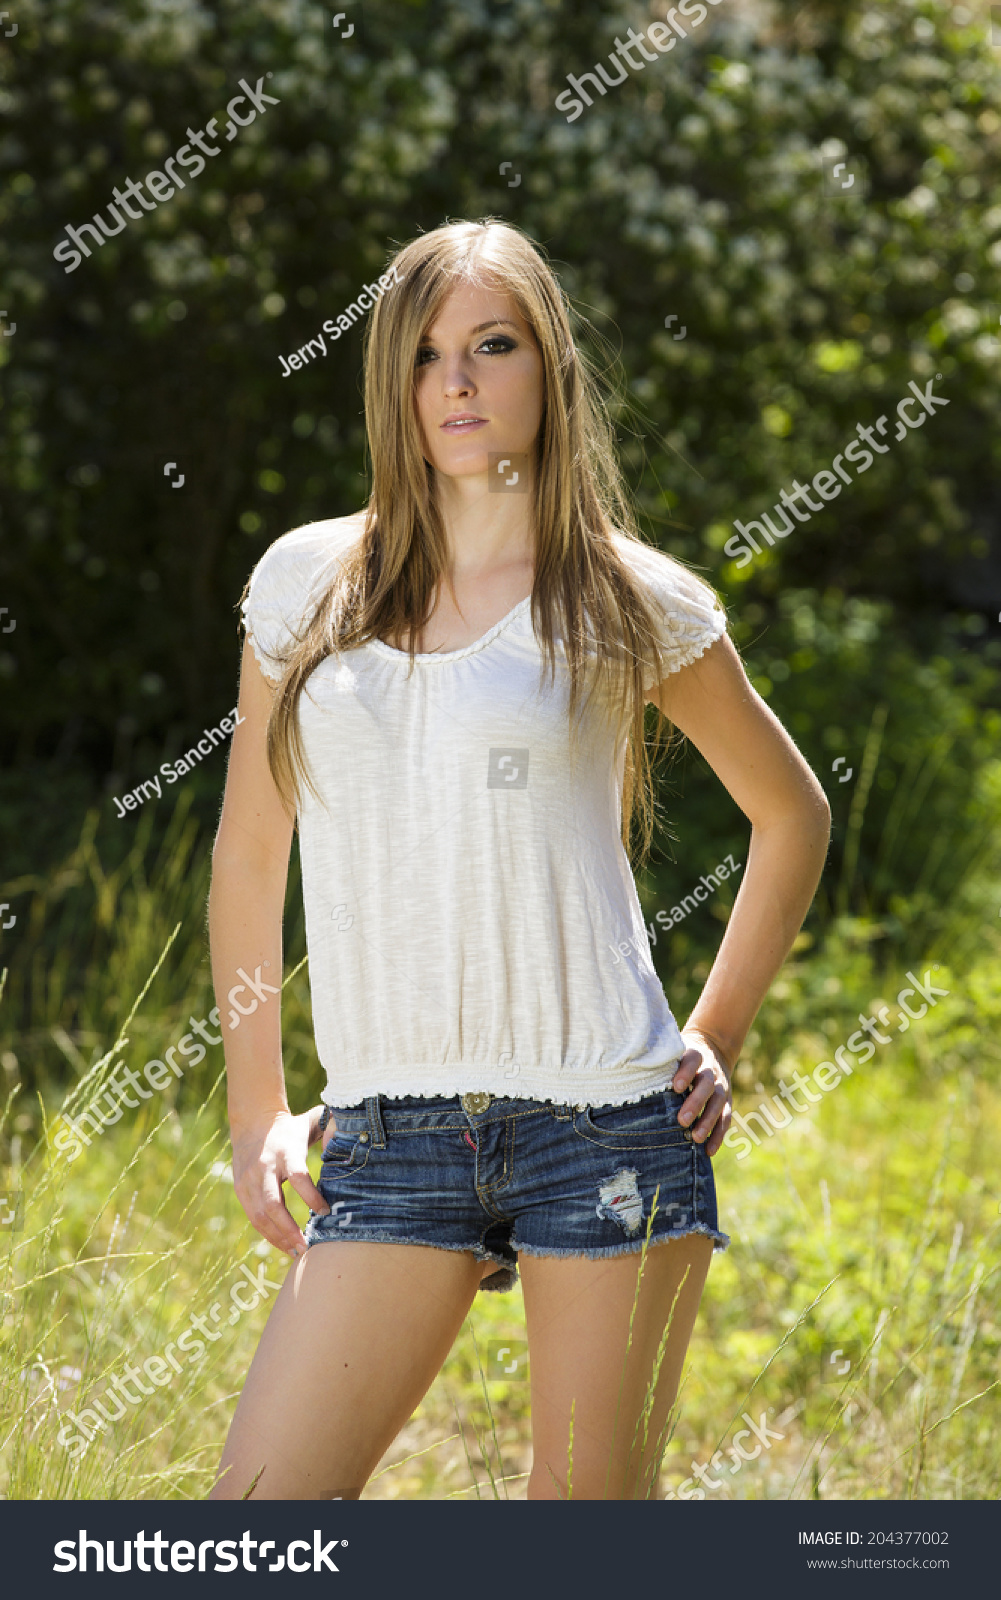 Girl in tight jeans shorts